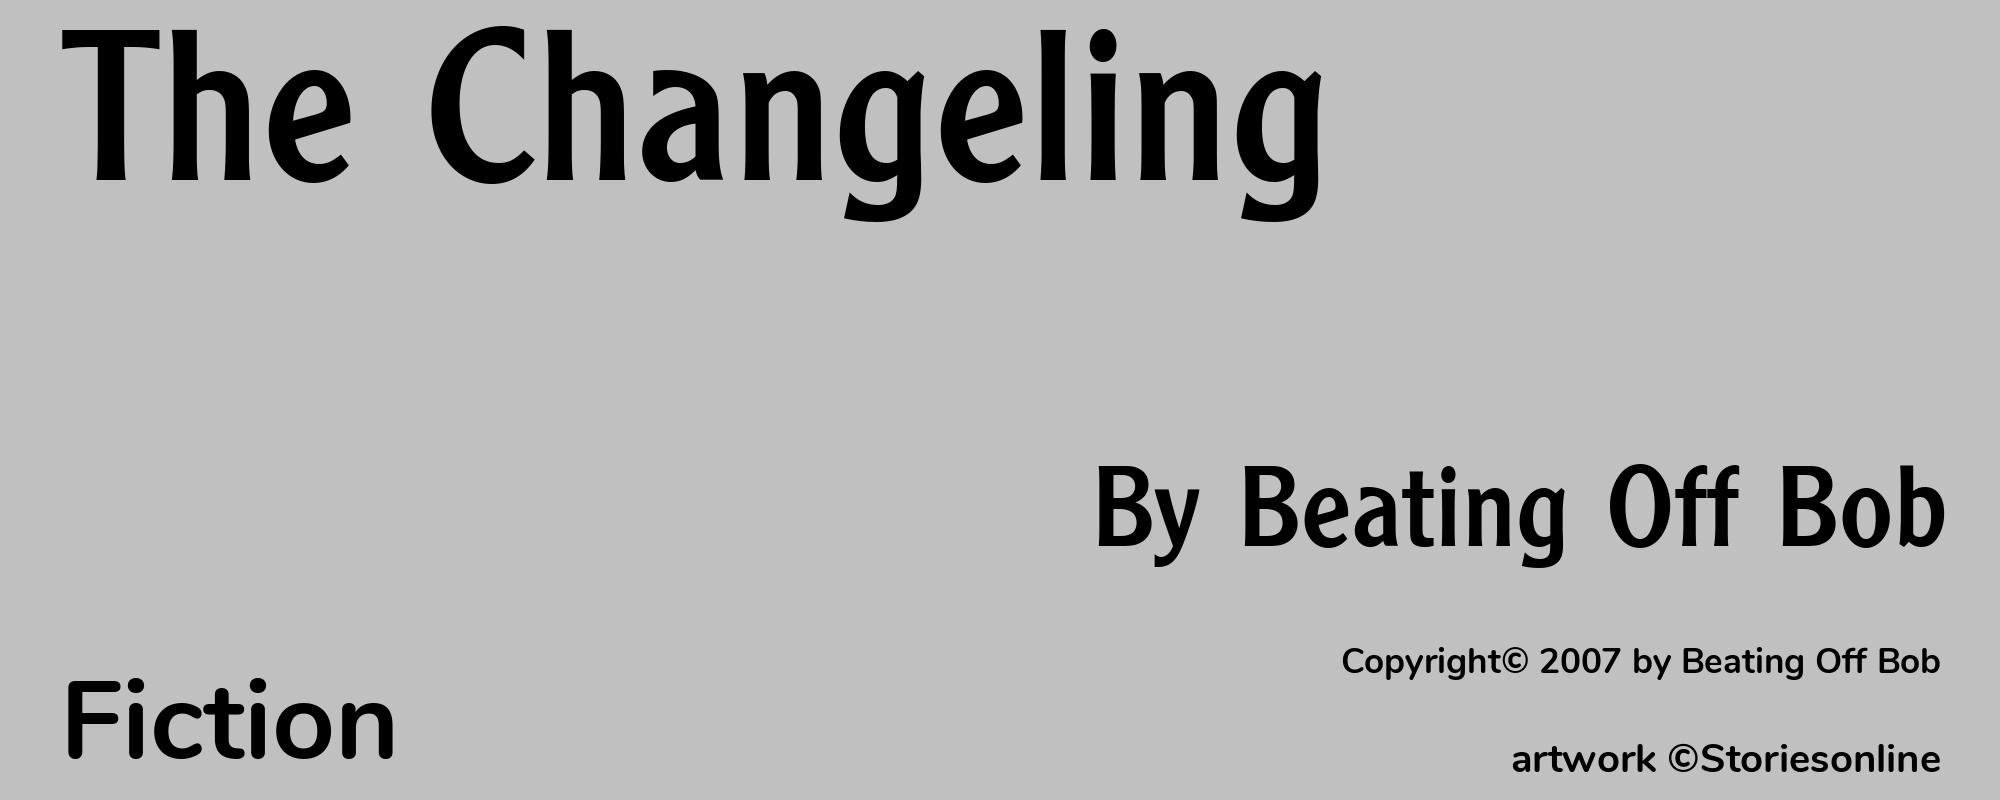 The Changeling - Cover